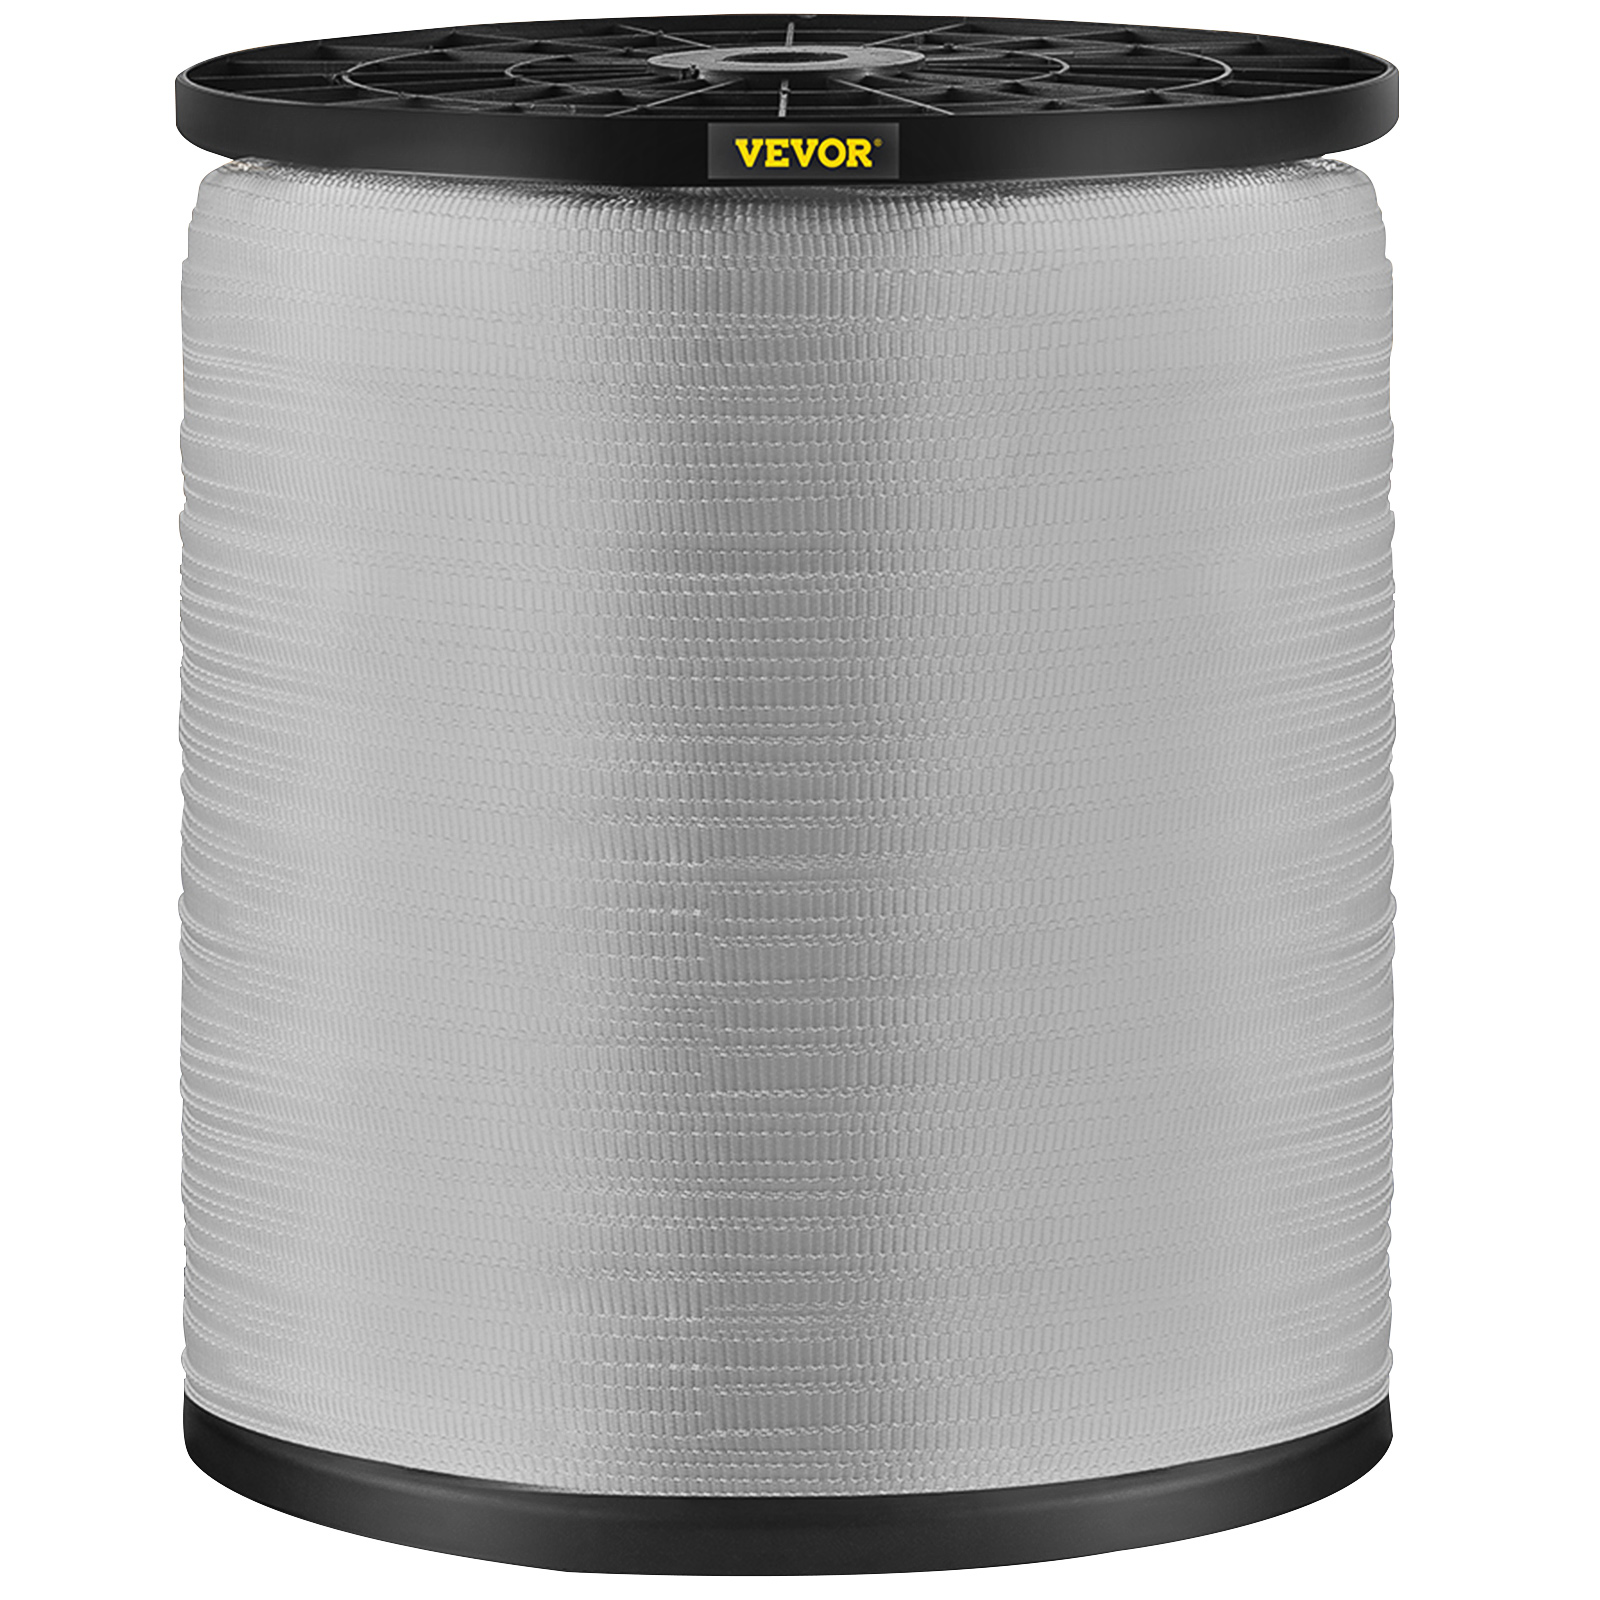 Vevor 5/8" X 5249' Polyester Pull Tape Flat Rope 1800 Lbs Tensile Capacity от Vevor Many GEOs